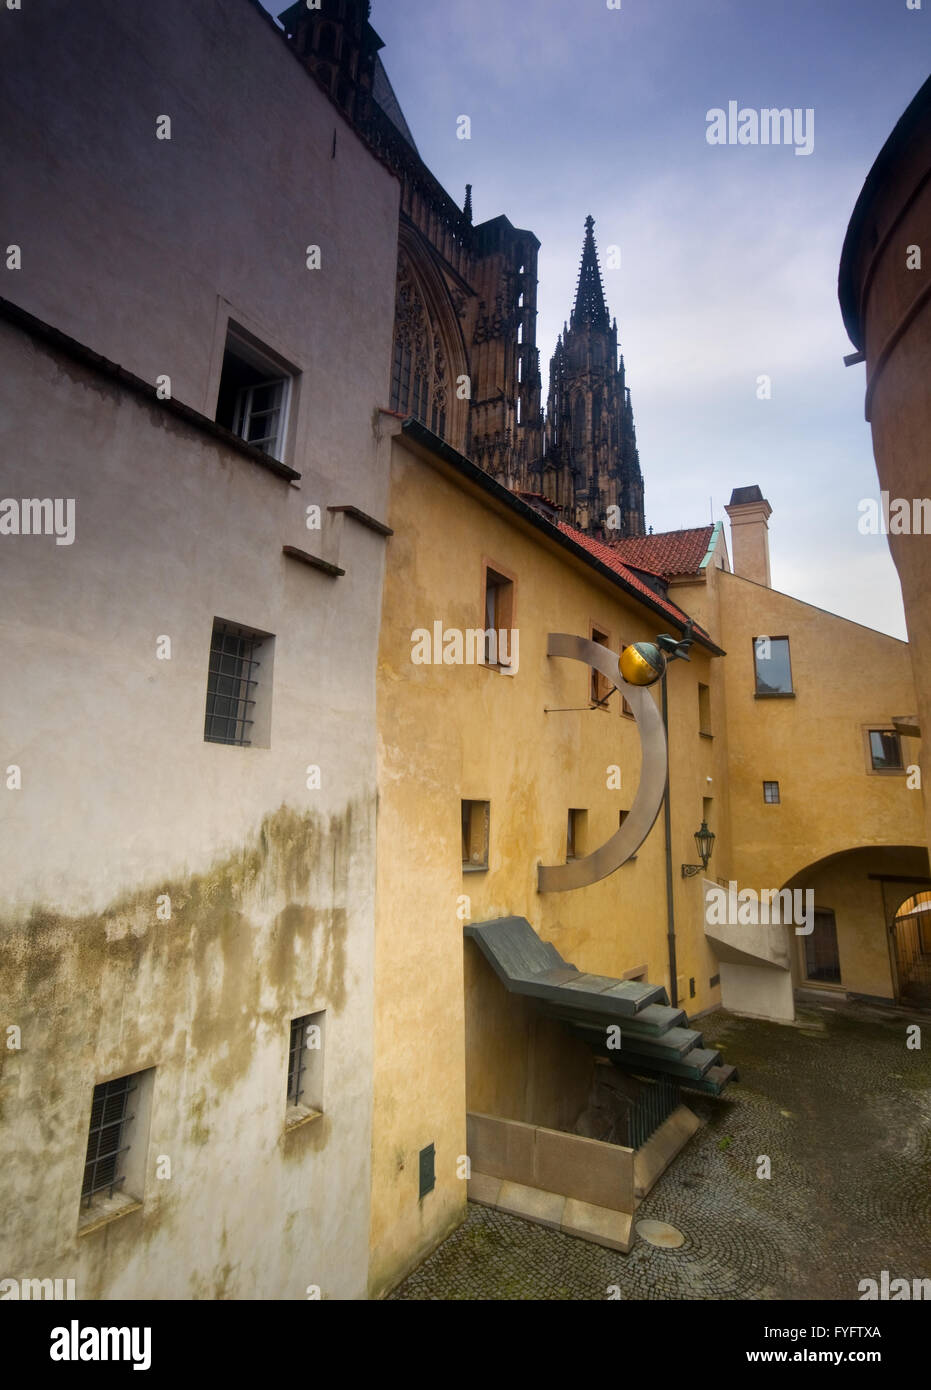 Prague. Old, charming buildings Stock Photo